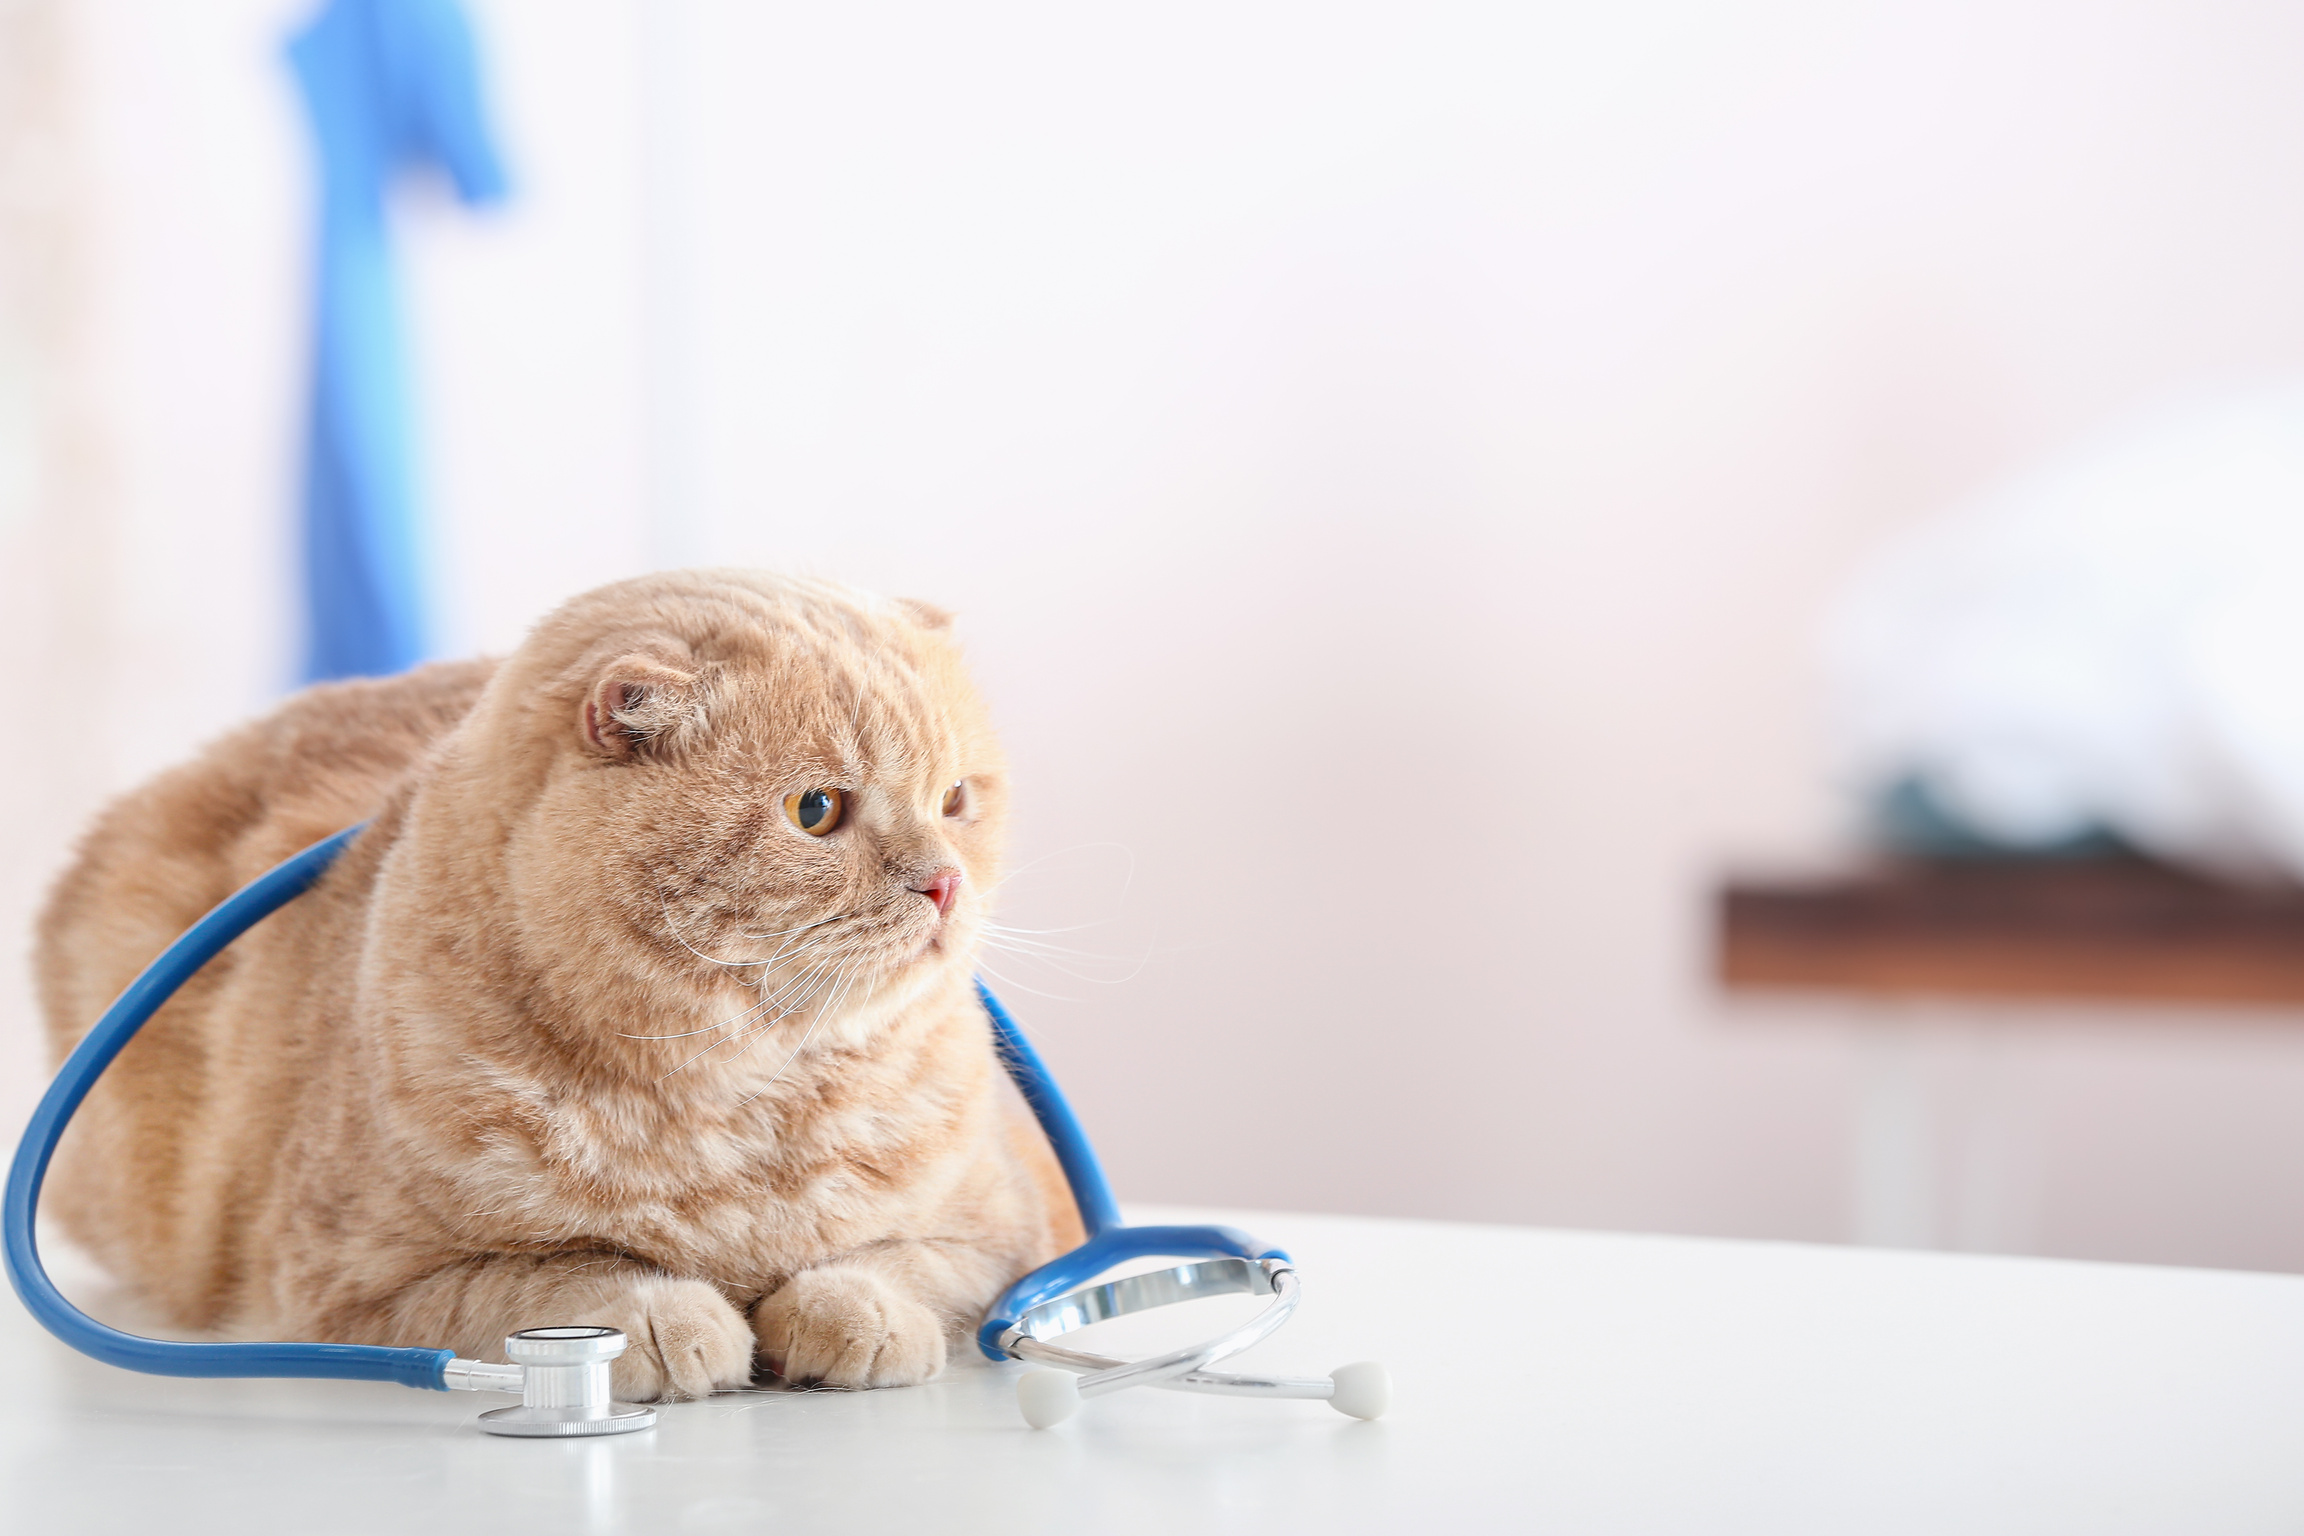  Cat with Stethoscope in Vet Clinic